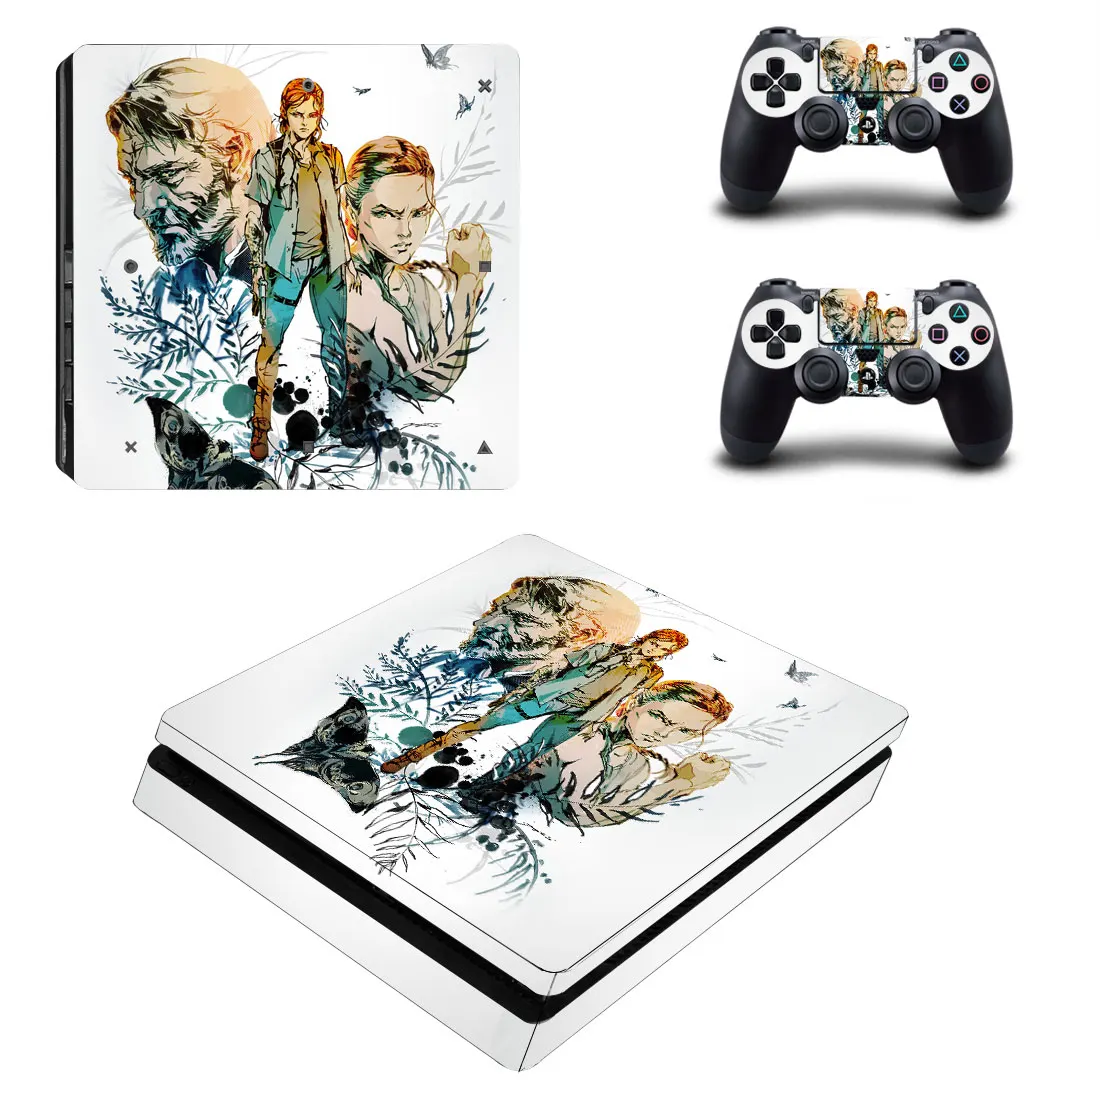 The Last of Us PS4 Slim Skin Sticker For Sony PlayStation 4 Console and Controllers PS4 Slim Skins Sticker Decal Vinyl